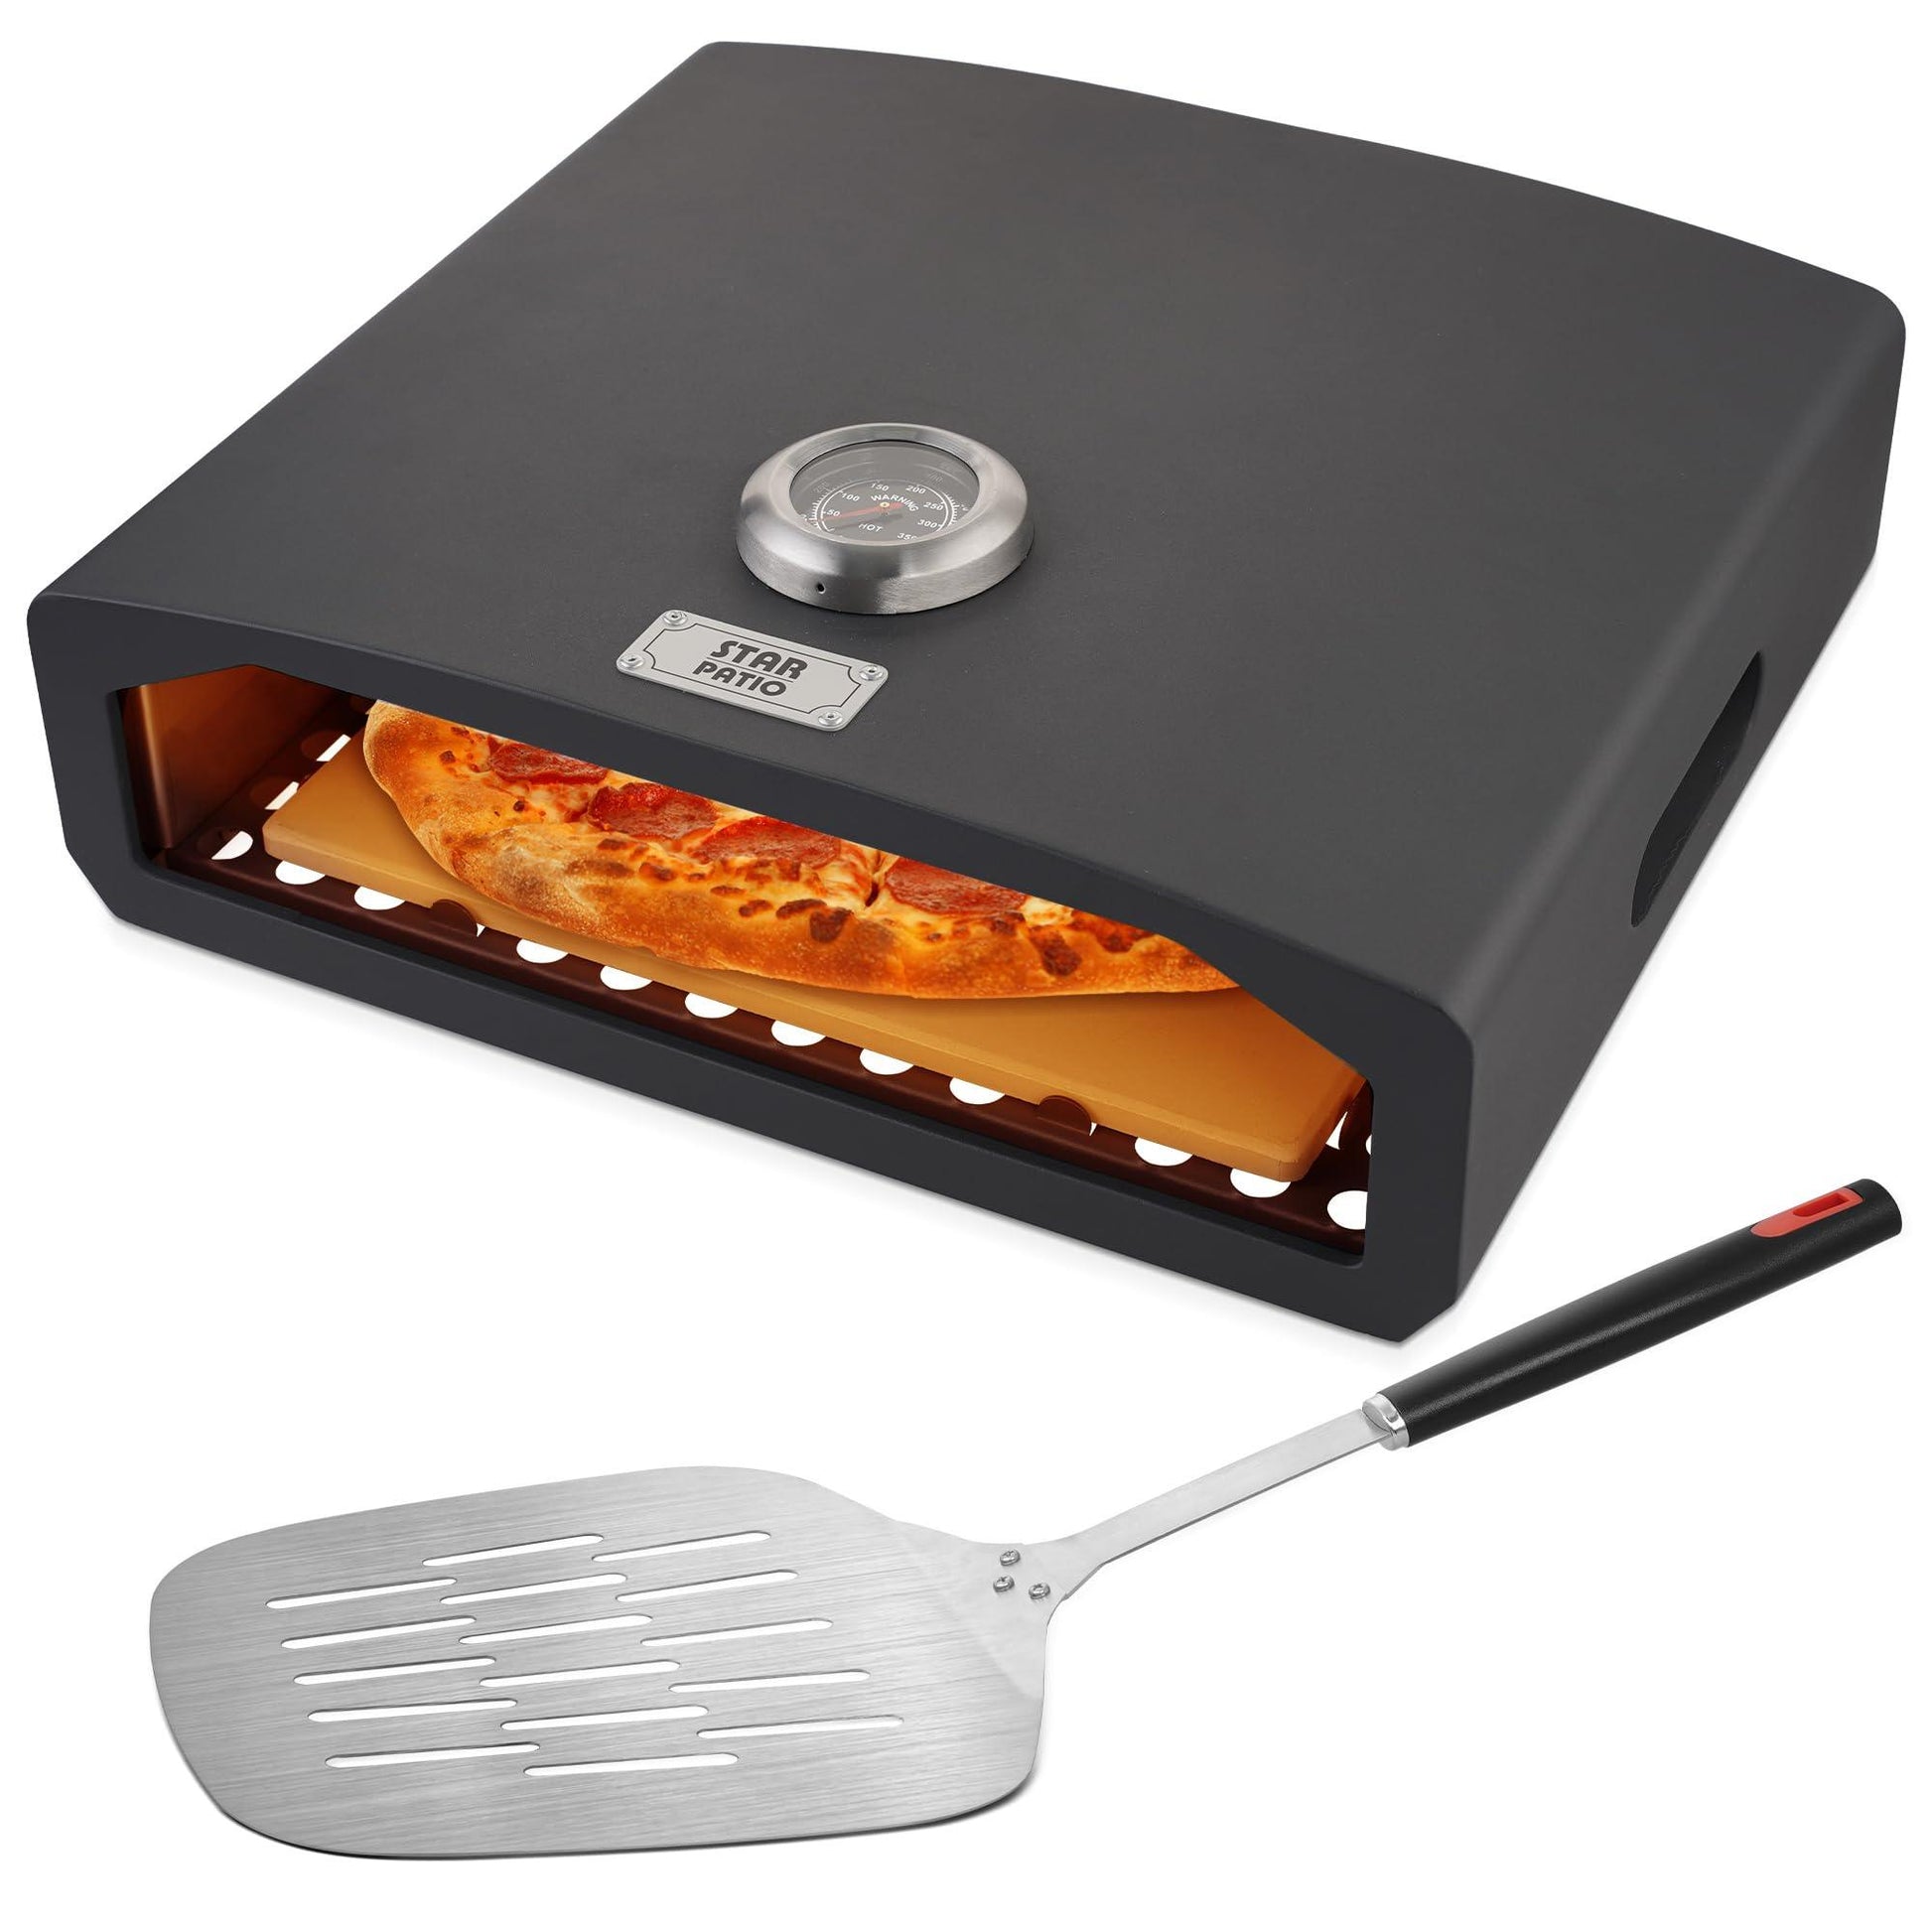 STAR PATIO Pizza Oven for Grill - Portable Grill Top Pizza Oven with Pizza Stone, Pizza Peel and Thermometer - Home Backyard Pizza Maker for Charcoal Grill, Gas Grill, PZB-002 - CookCave